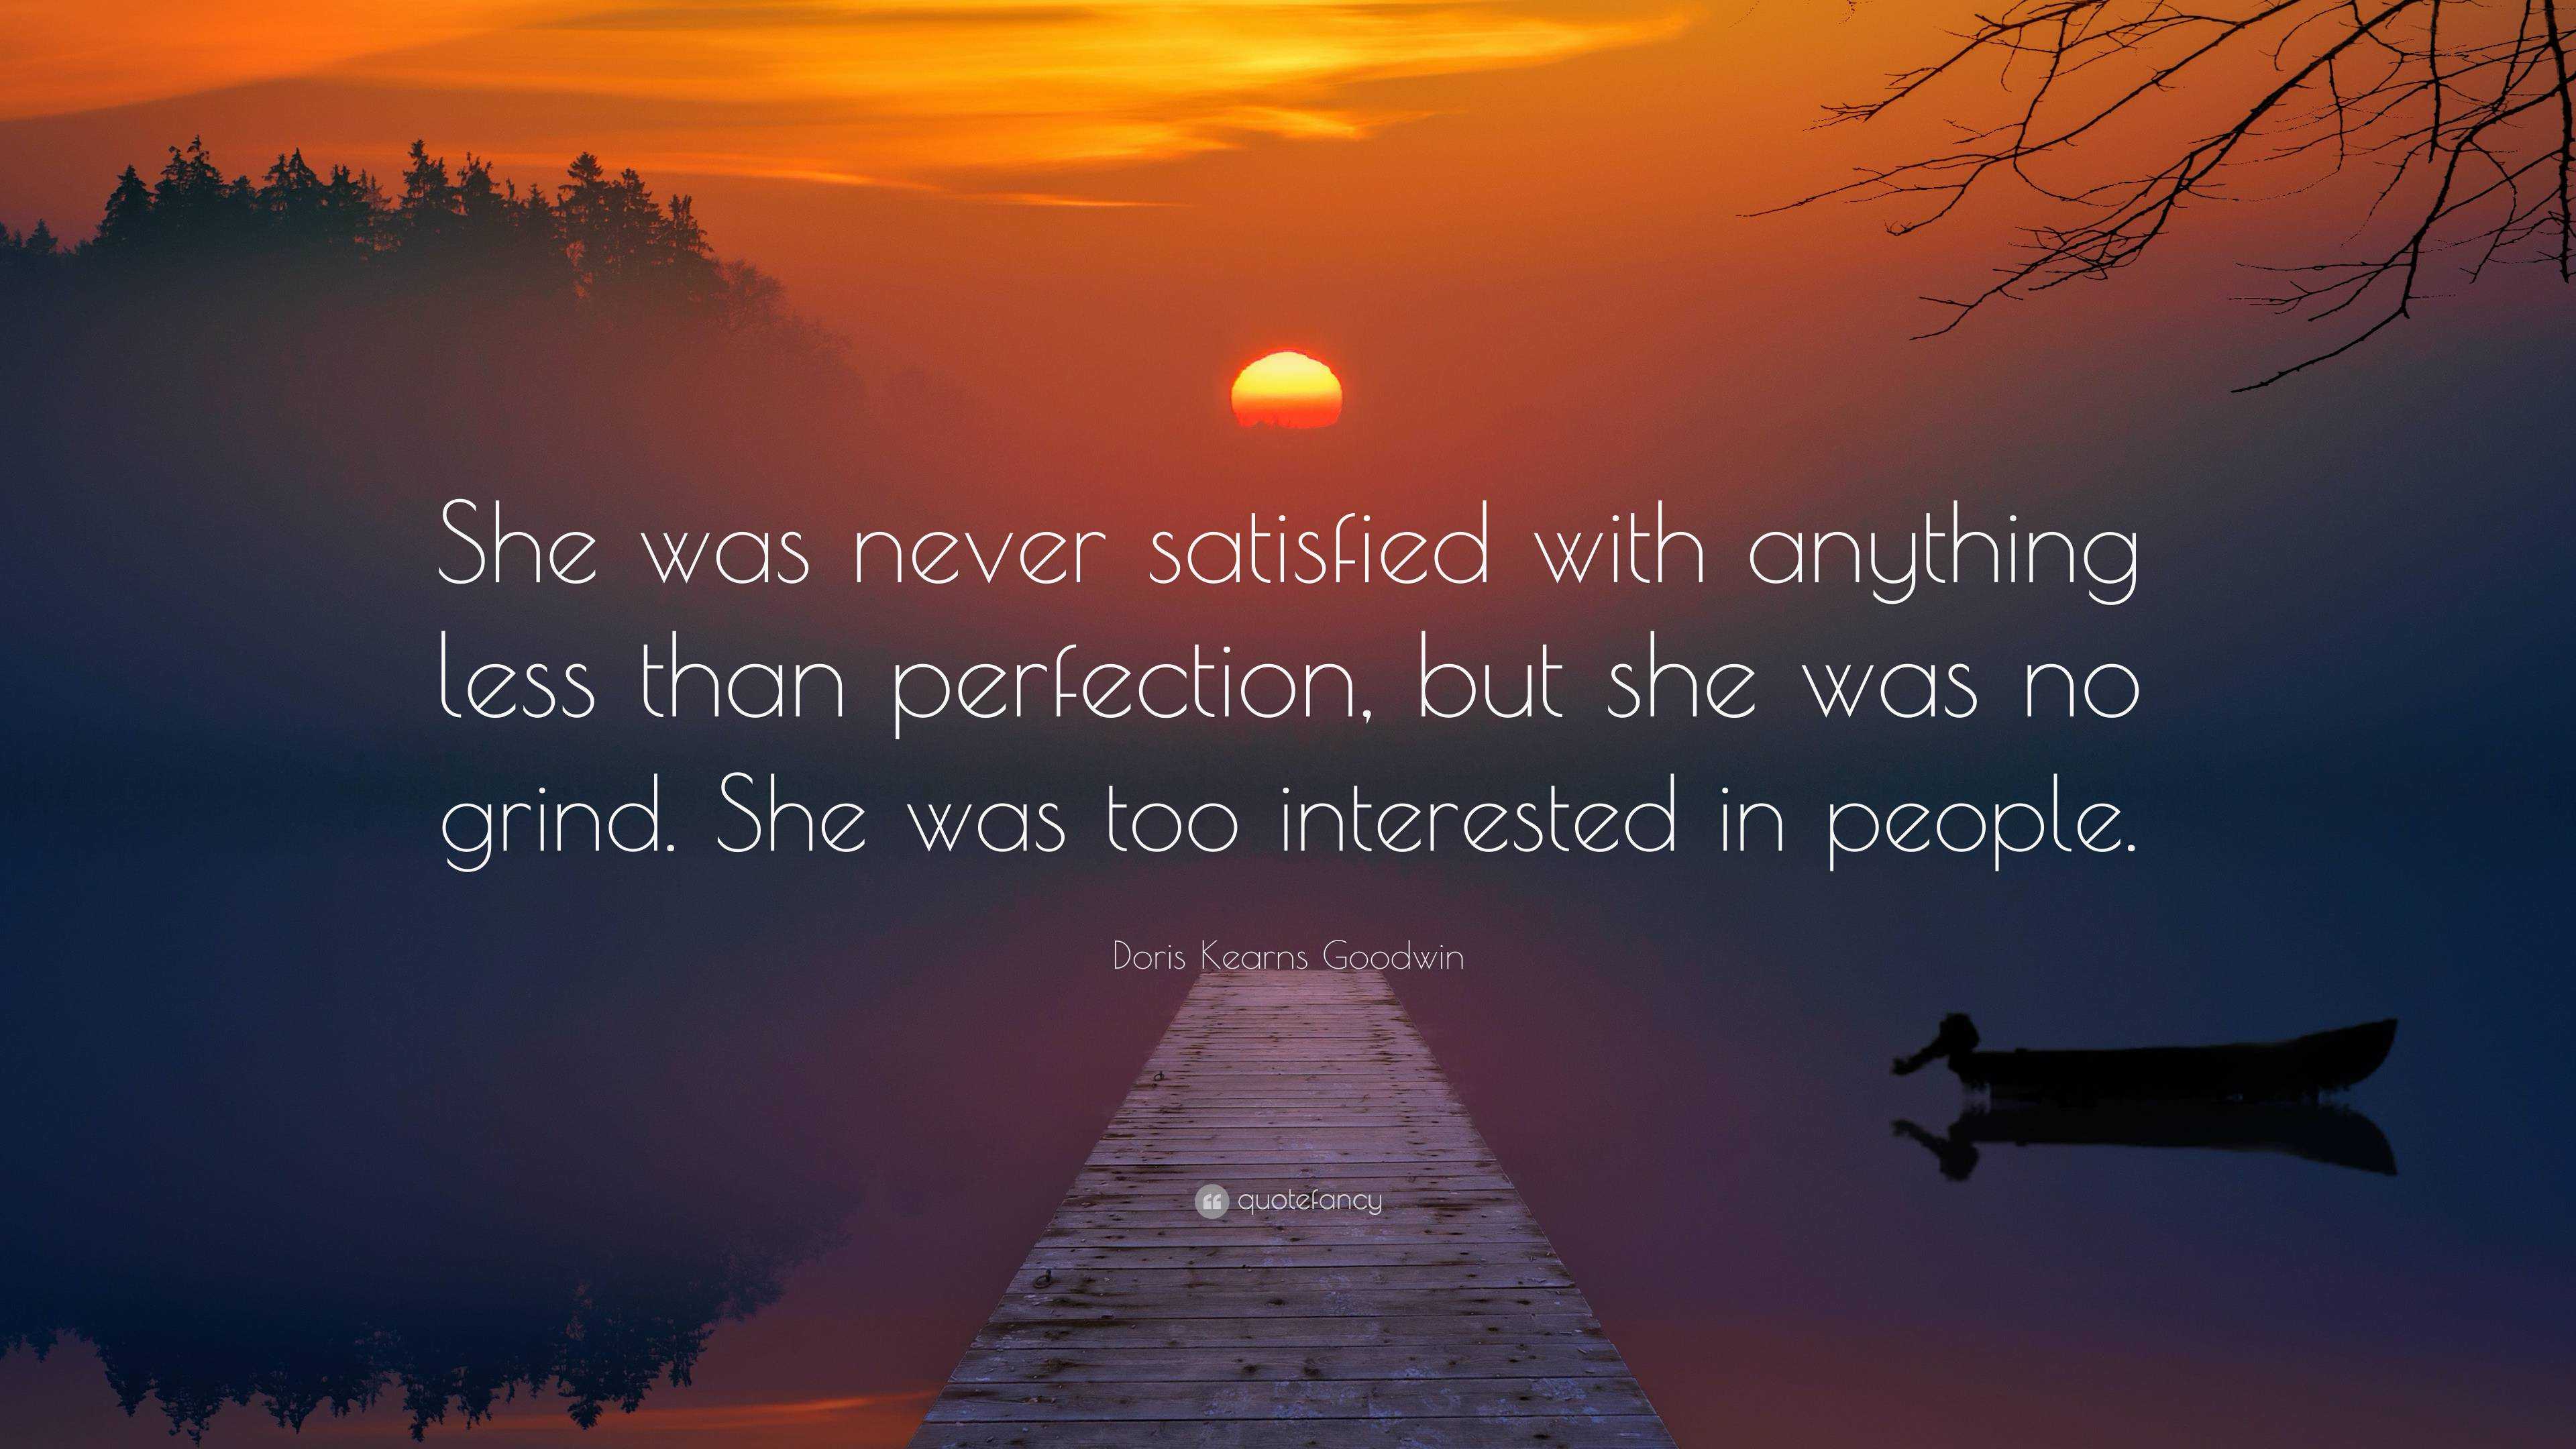 Doris Kearns Goodwin Quote: “She was never satisfied with anything less ...